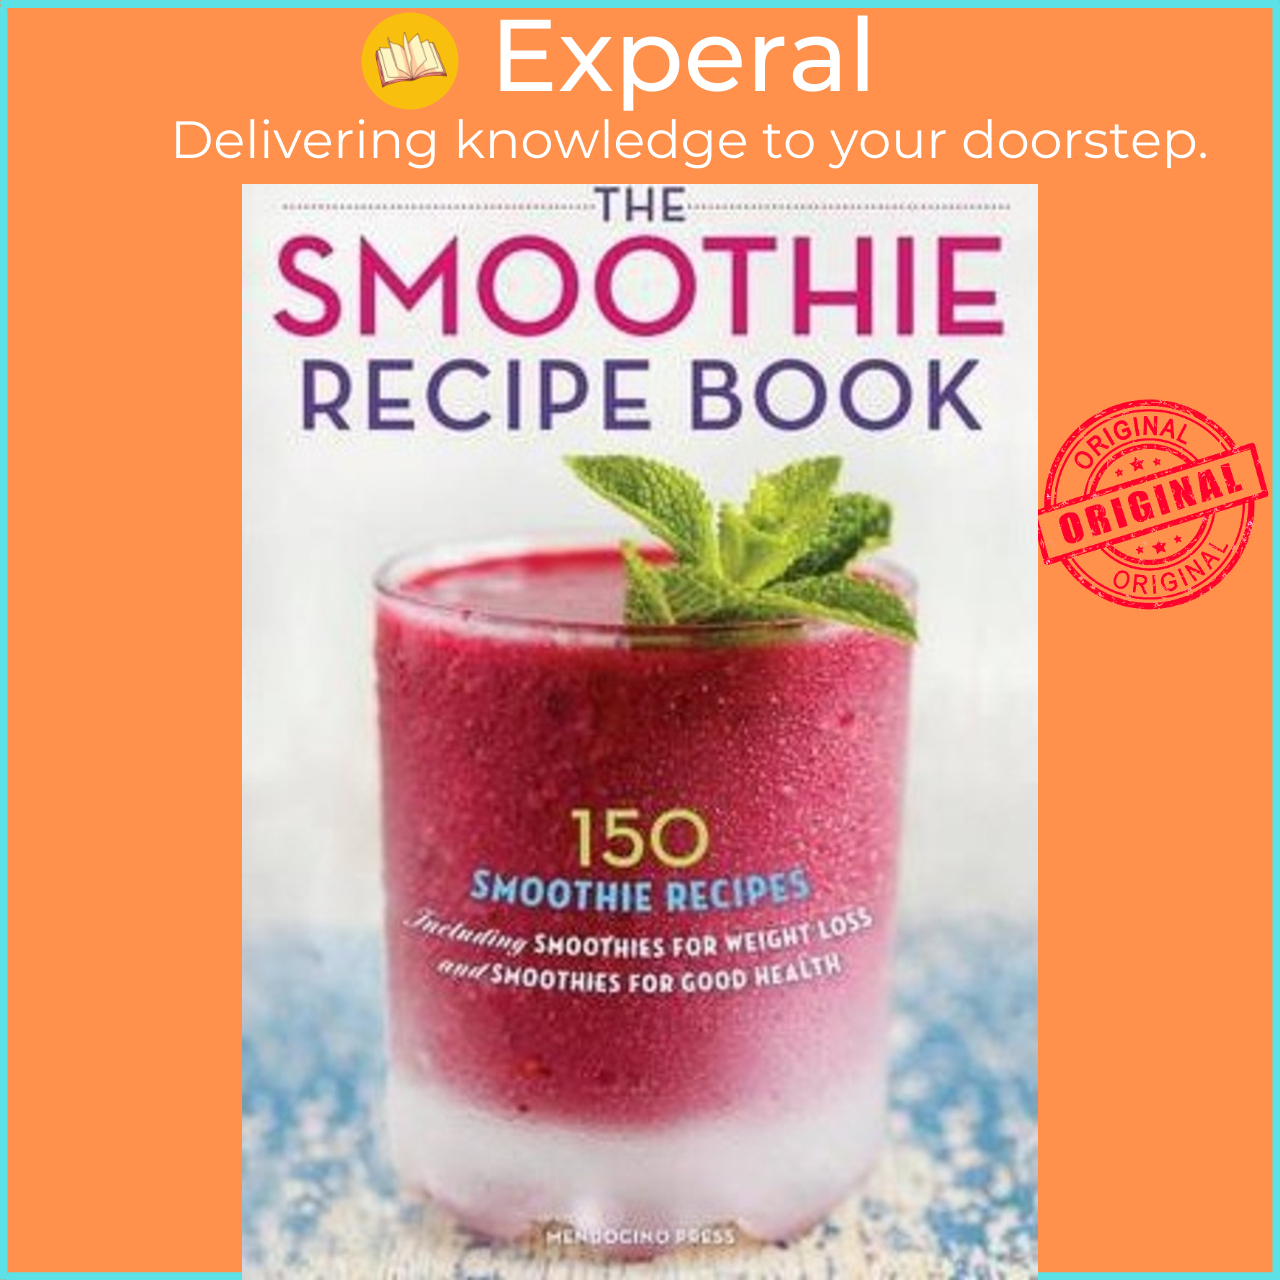 The Smoothie Recipe Book : 150 Smoothie Recipes Including Smoothies for  Weigh by Mendocino Press (US edition, paperback) | Lazada Singapore